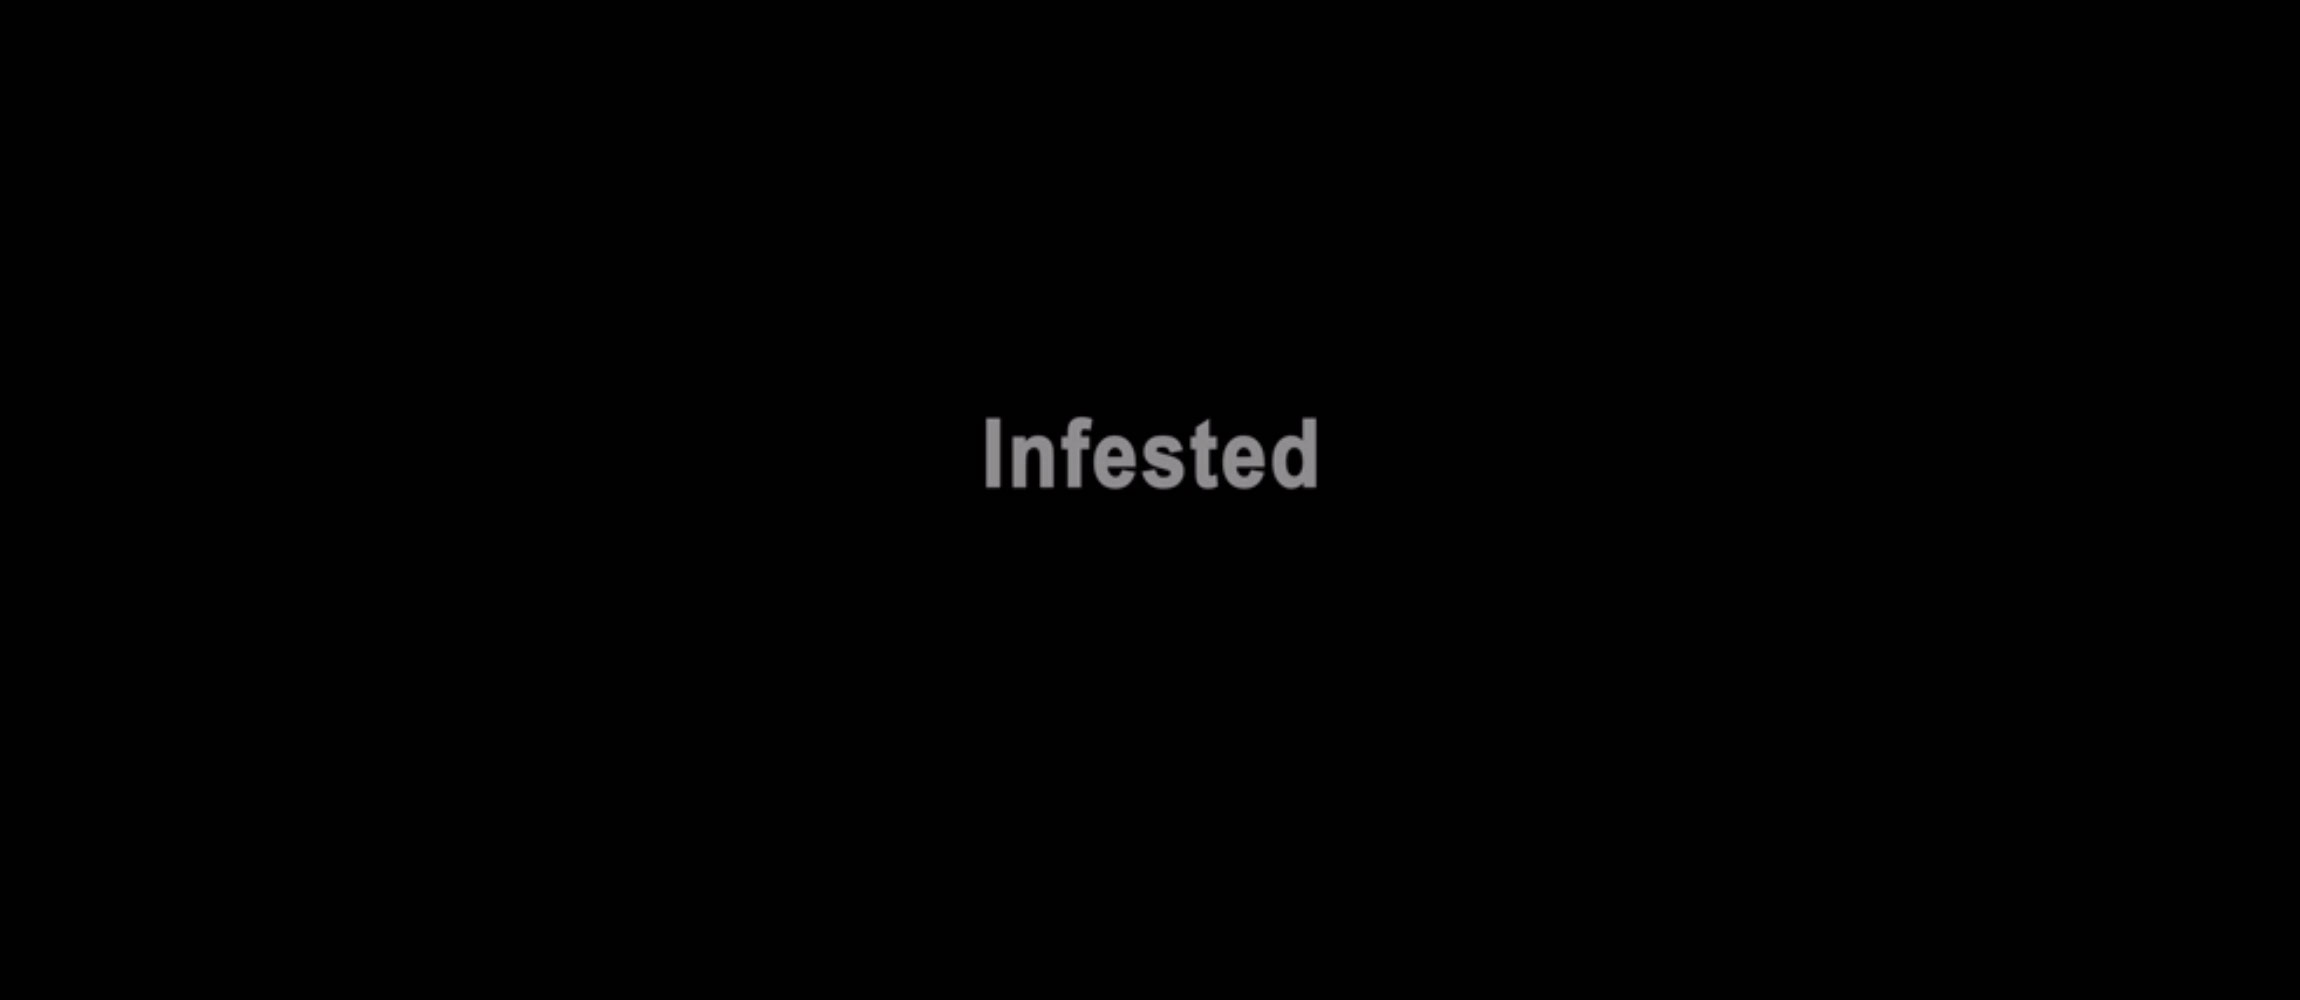 'Infested' title card